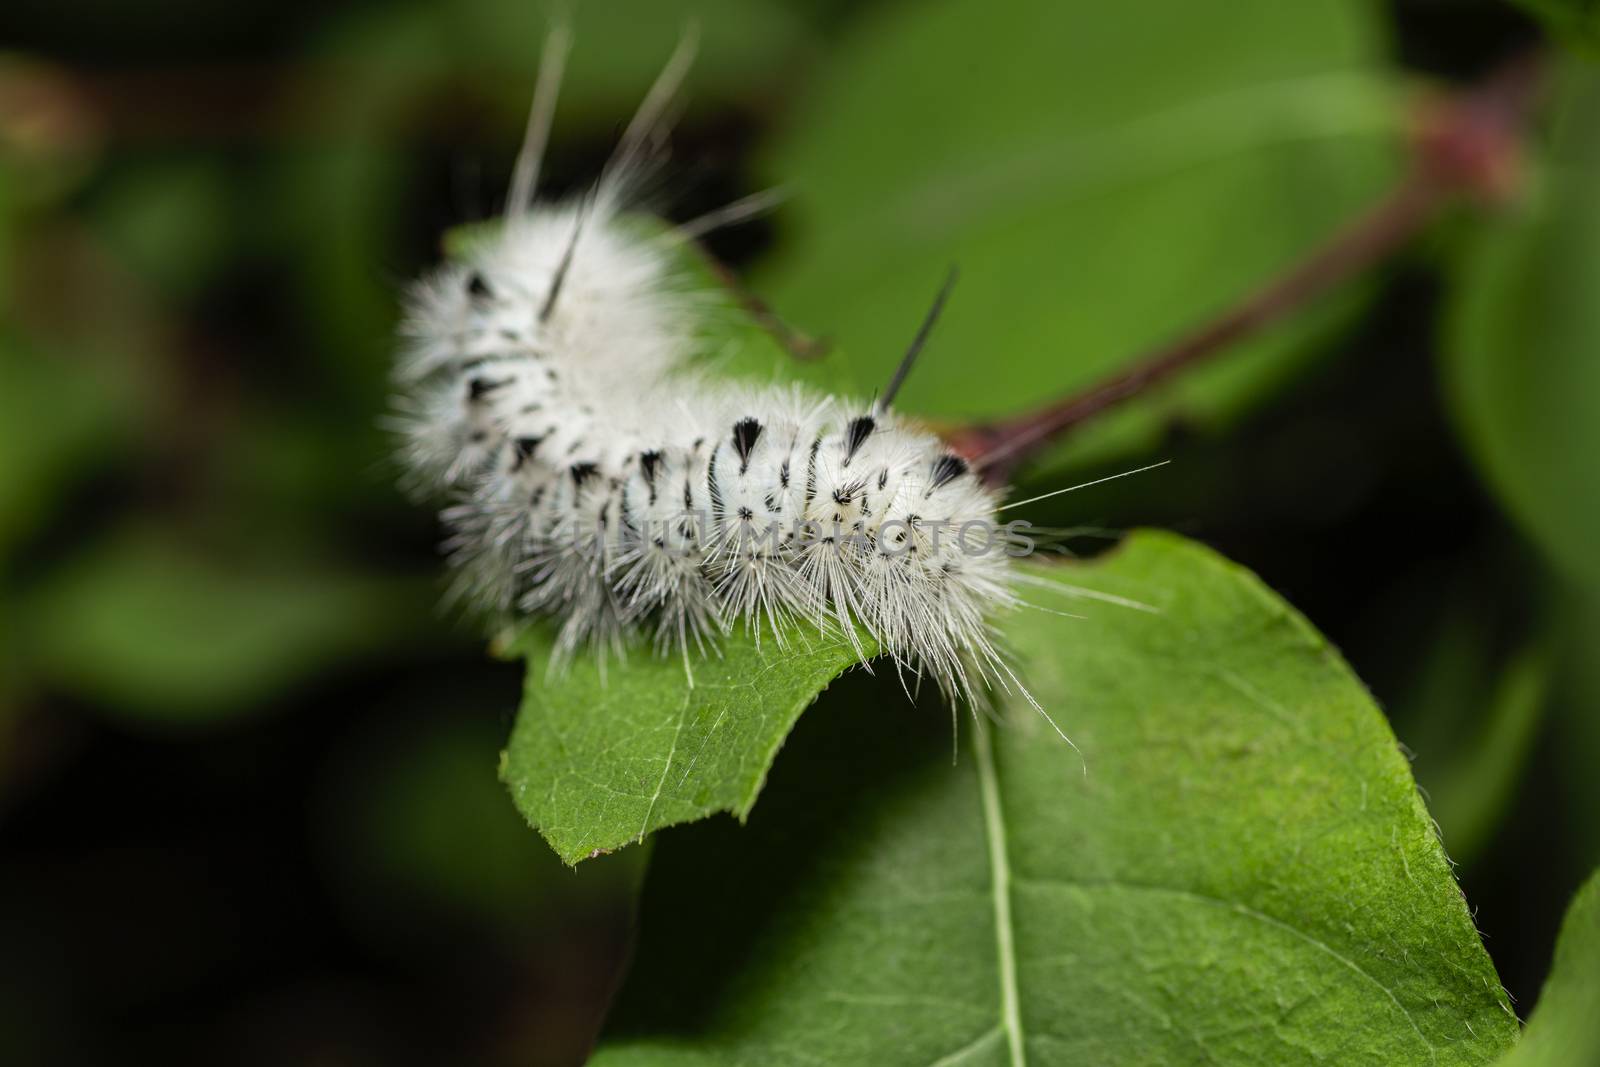 Hickory tussock moth by mypstudio